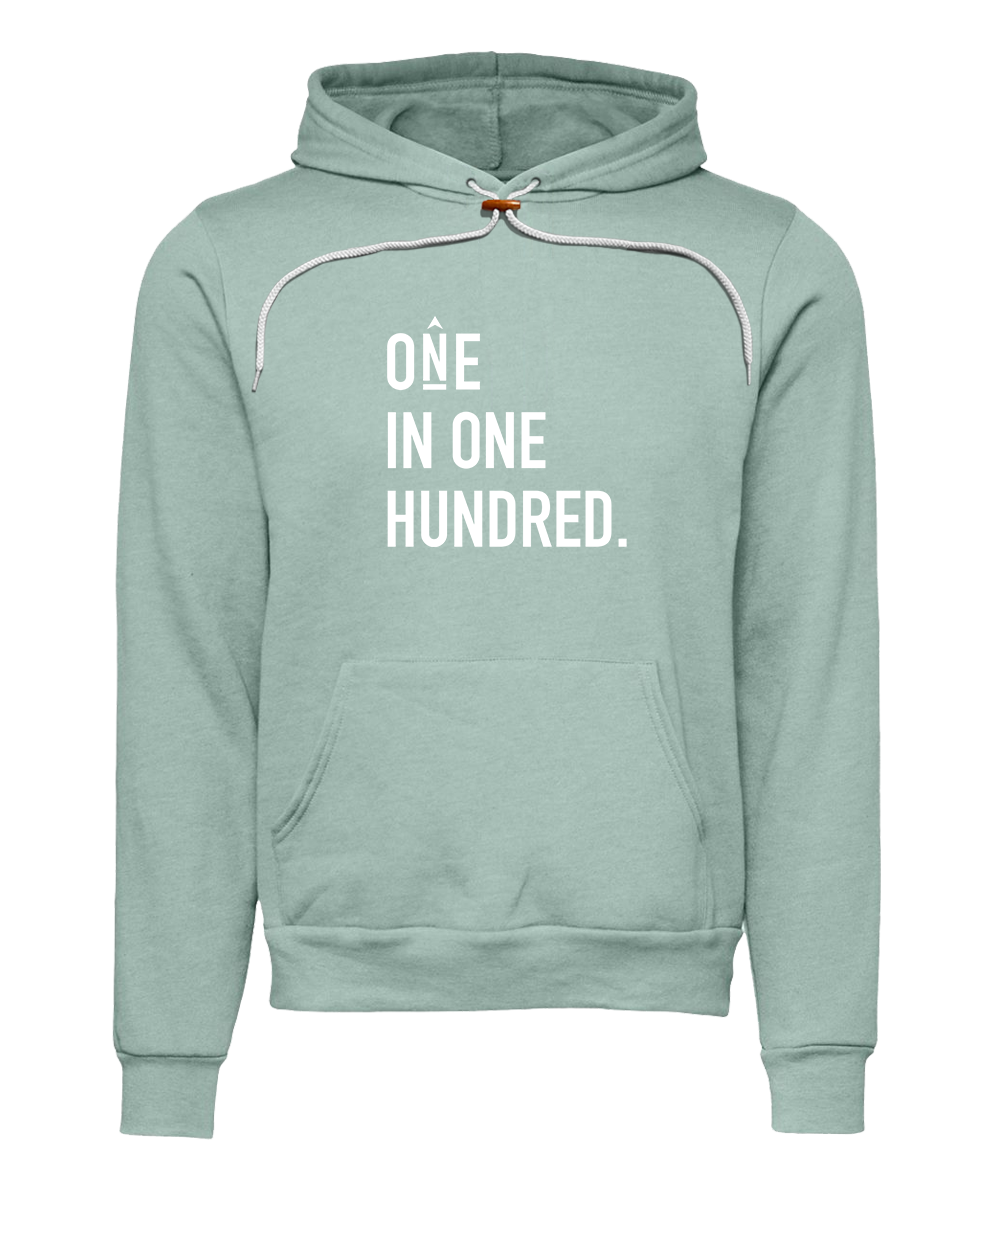 One in One Hundred Stacked Premium Super Soft Hooded Sweatshirt